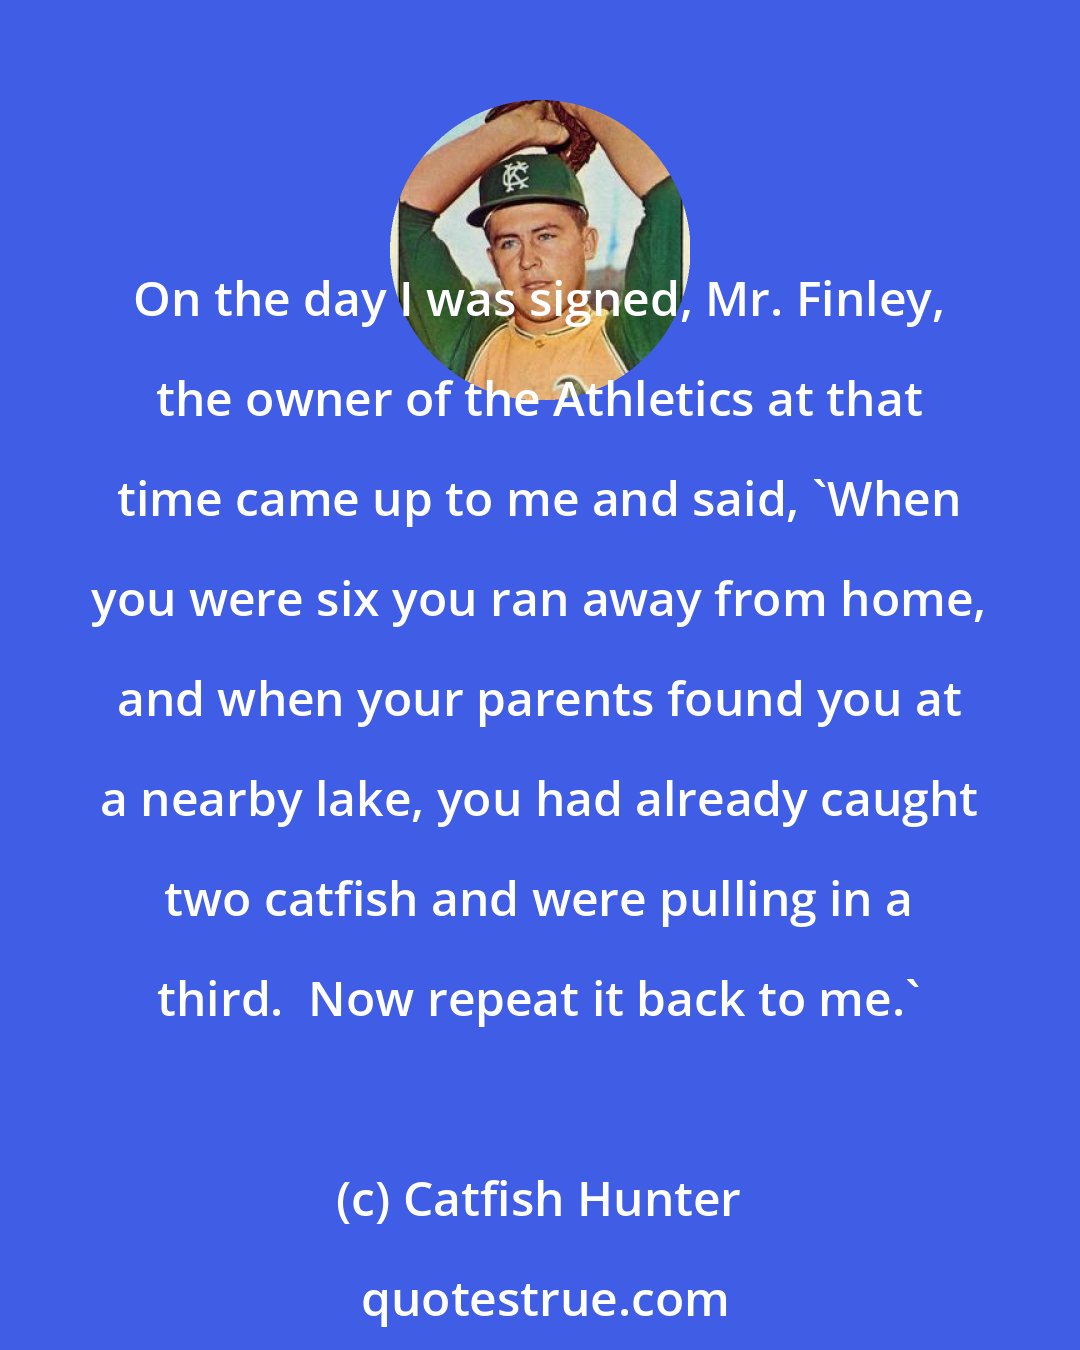 Catfish Hunter: On the day I was signed, Mr. Finley, the owner of the Athletics at that time came up to me and said, 'When you were six you ran away from home, and when your parents found you at a nearby lake, you had already caught two catfish and were pulling in a third.  Now repeat it back to me.'